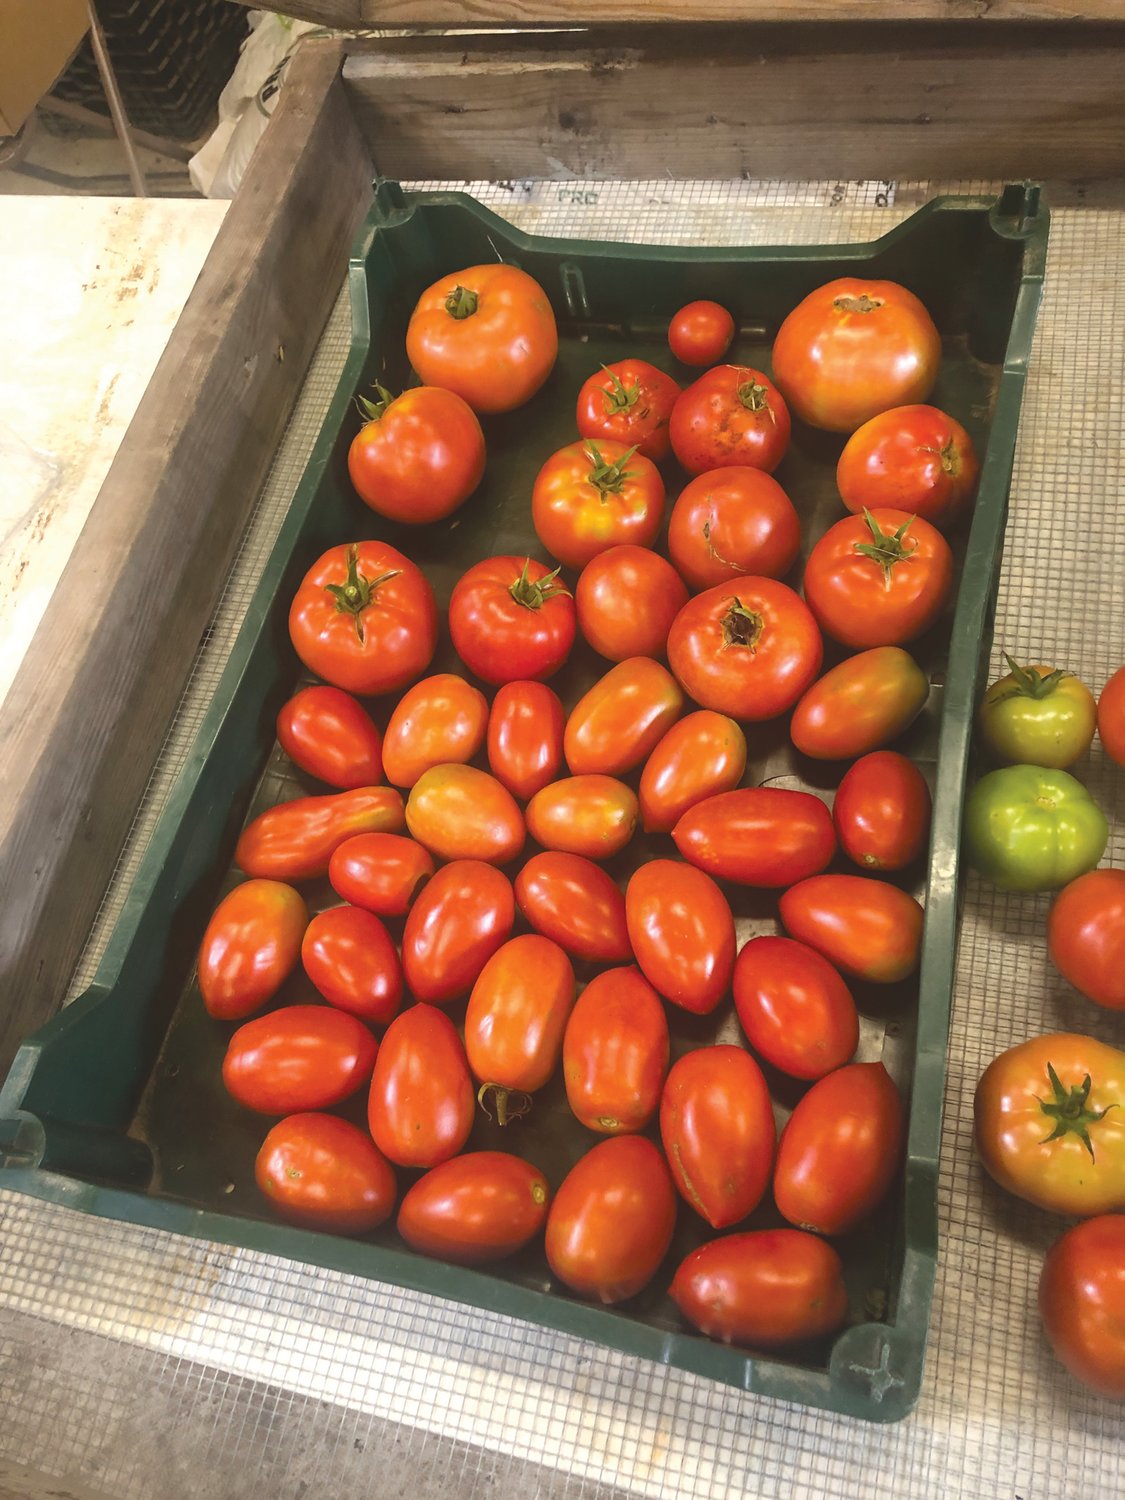 FRESH OFF THE VINE: Tomatoes are ripe and ready to be sold at Thursday’s farm stand.